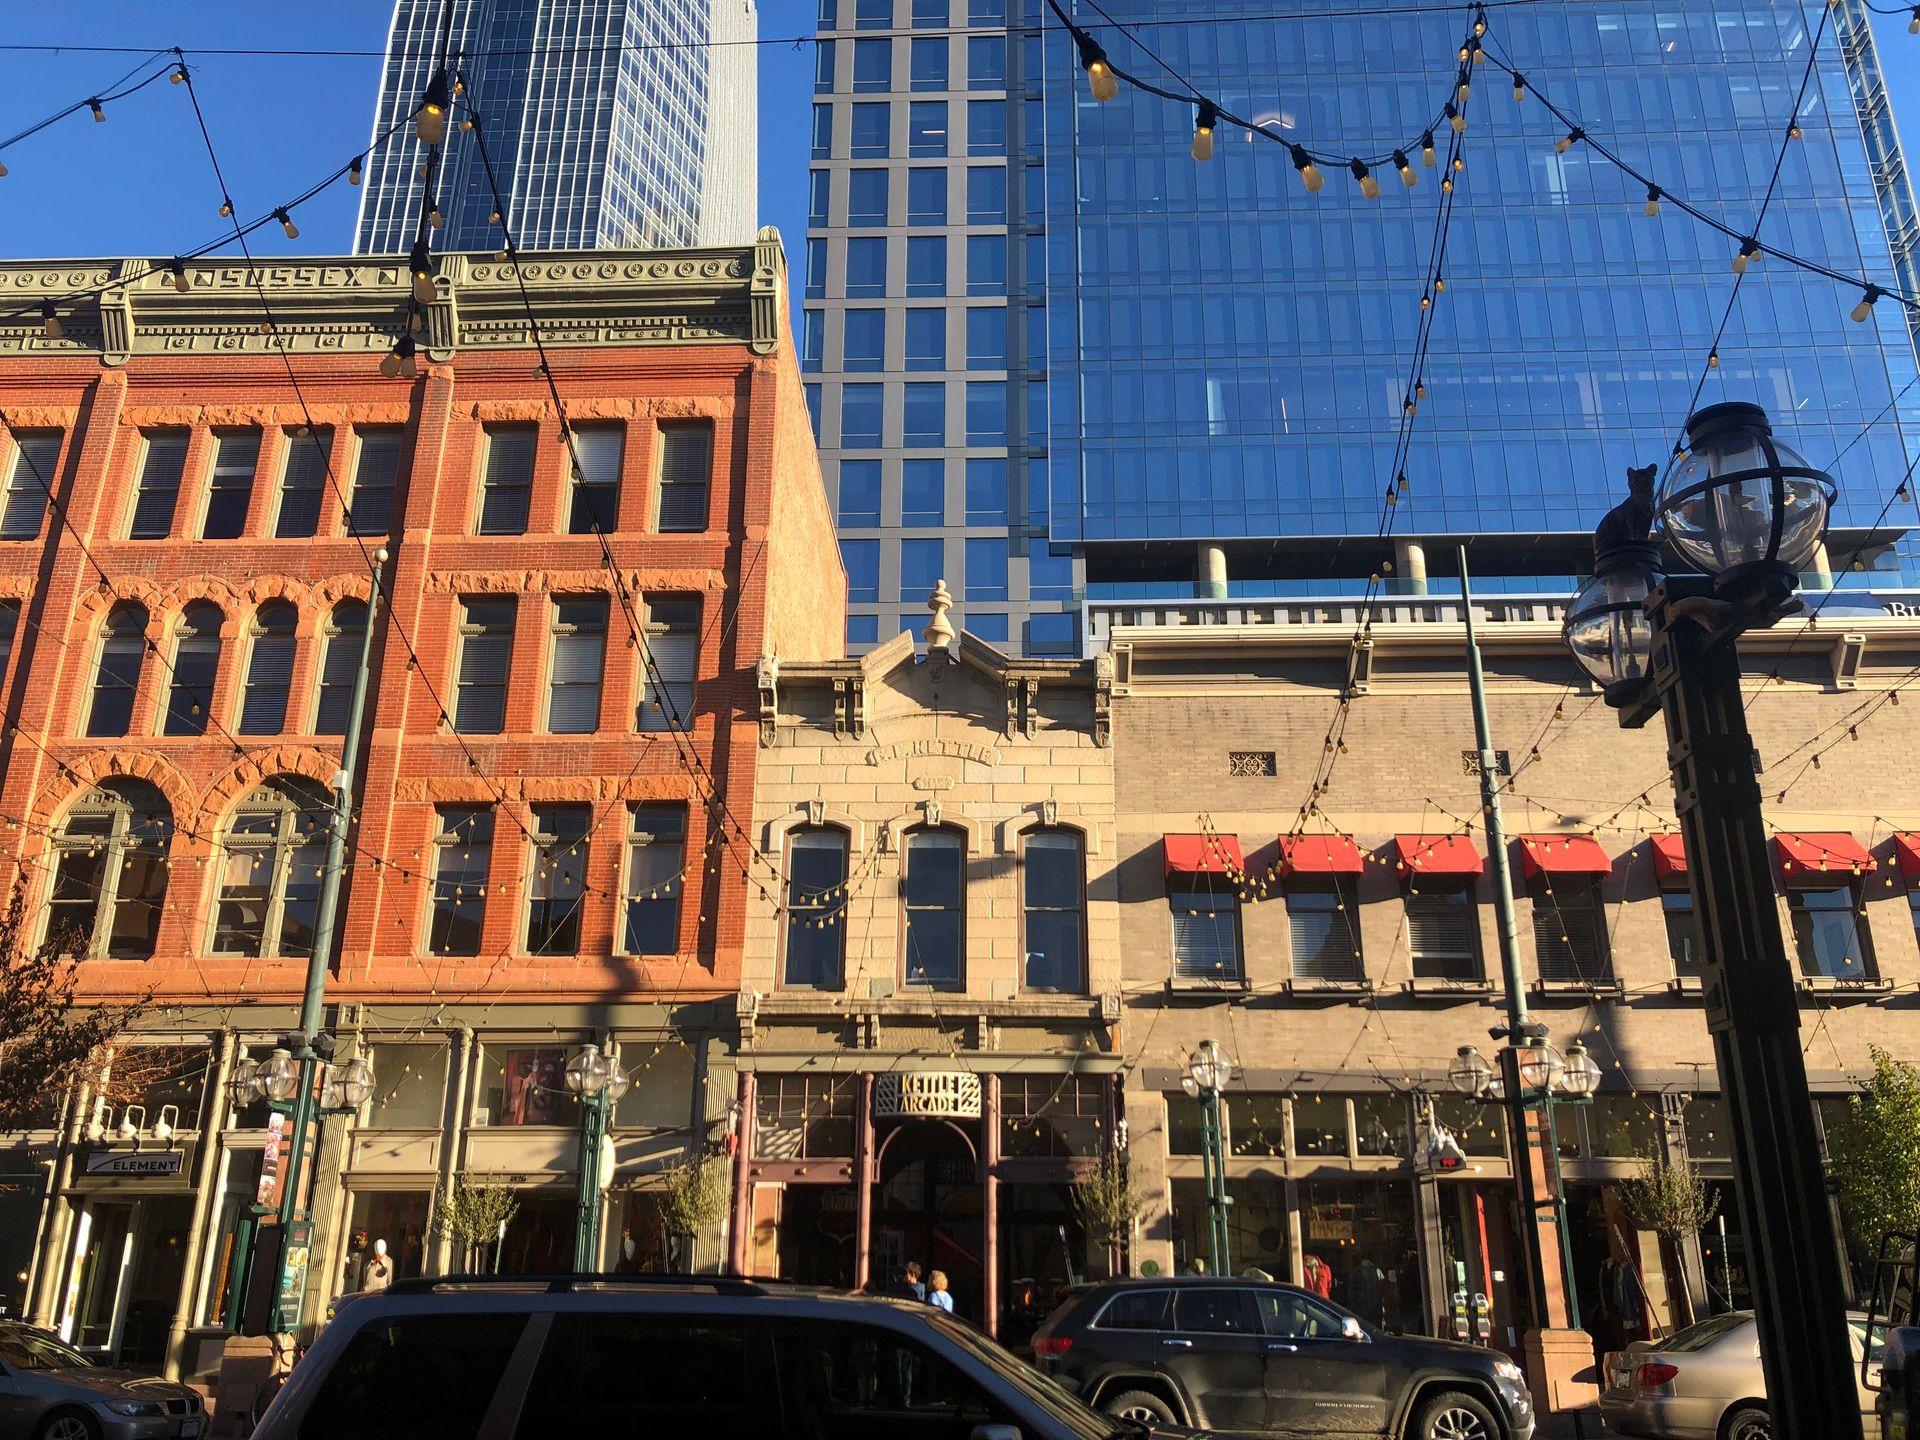 A city block with hanging string lights at Larimer Square.